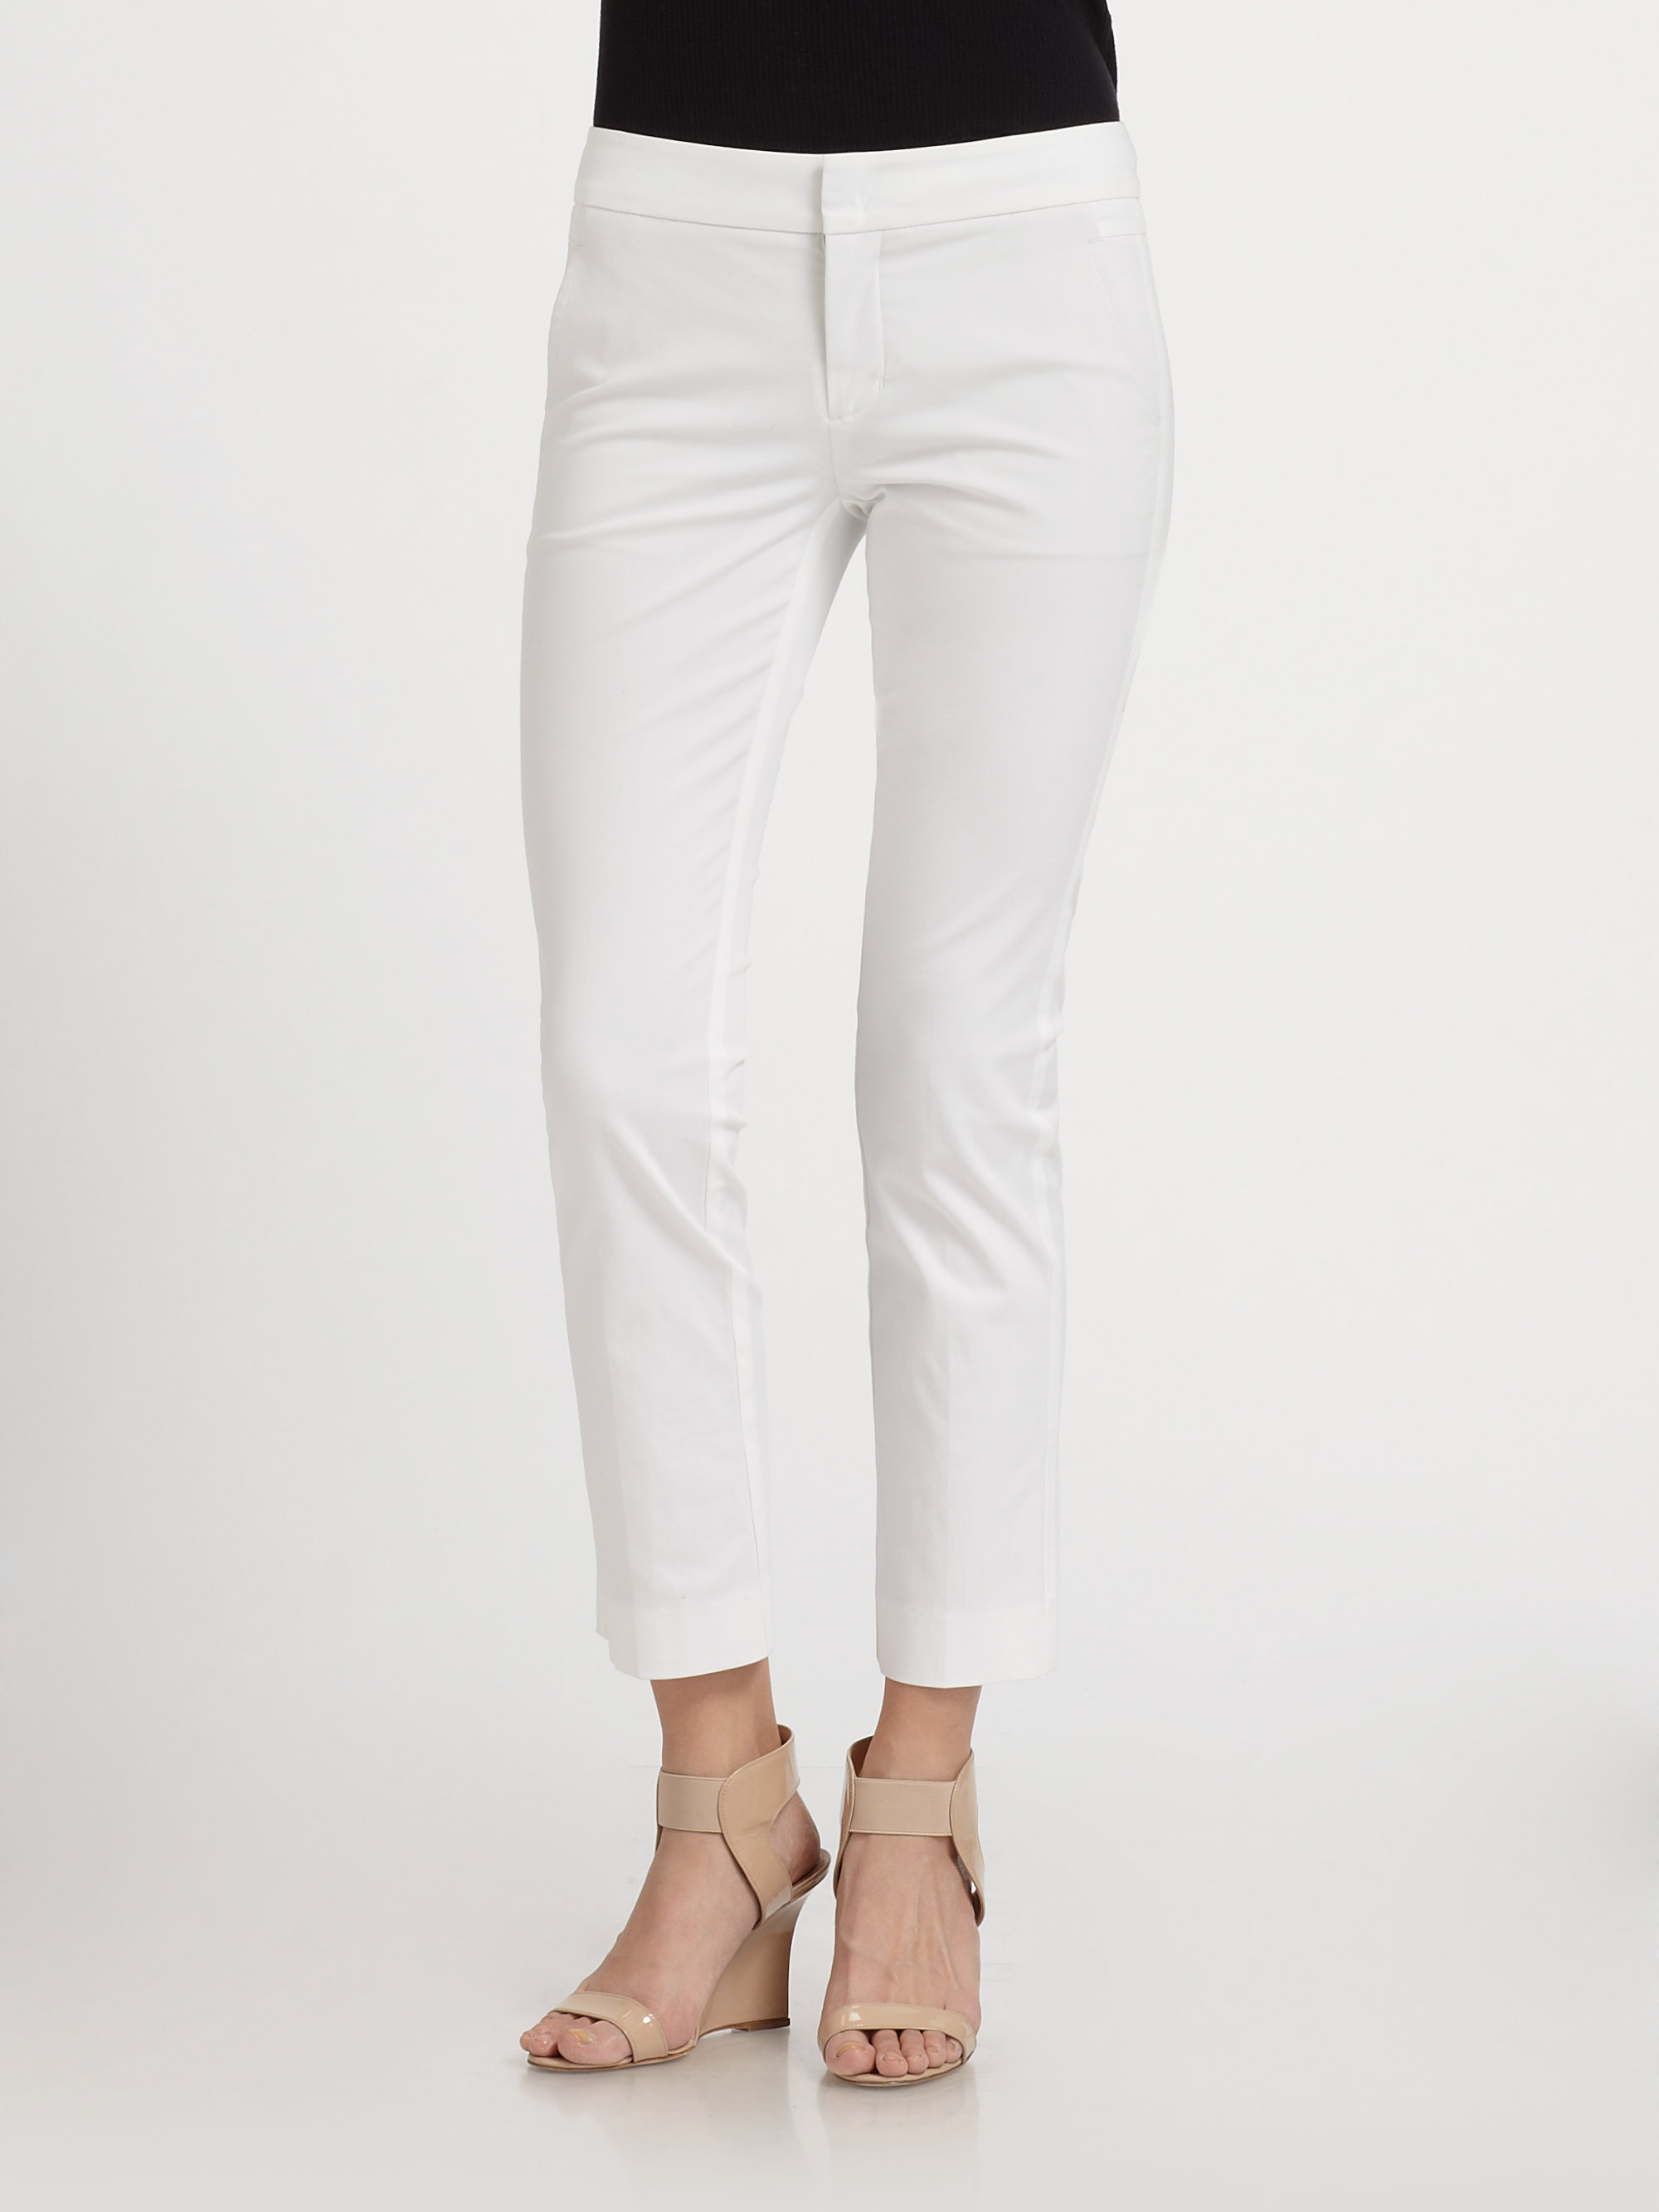 Lyst - Vince Stretch Cotton Cropped Flare Pants in White